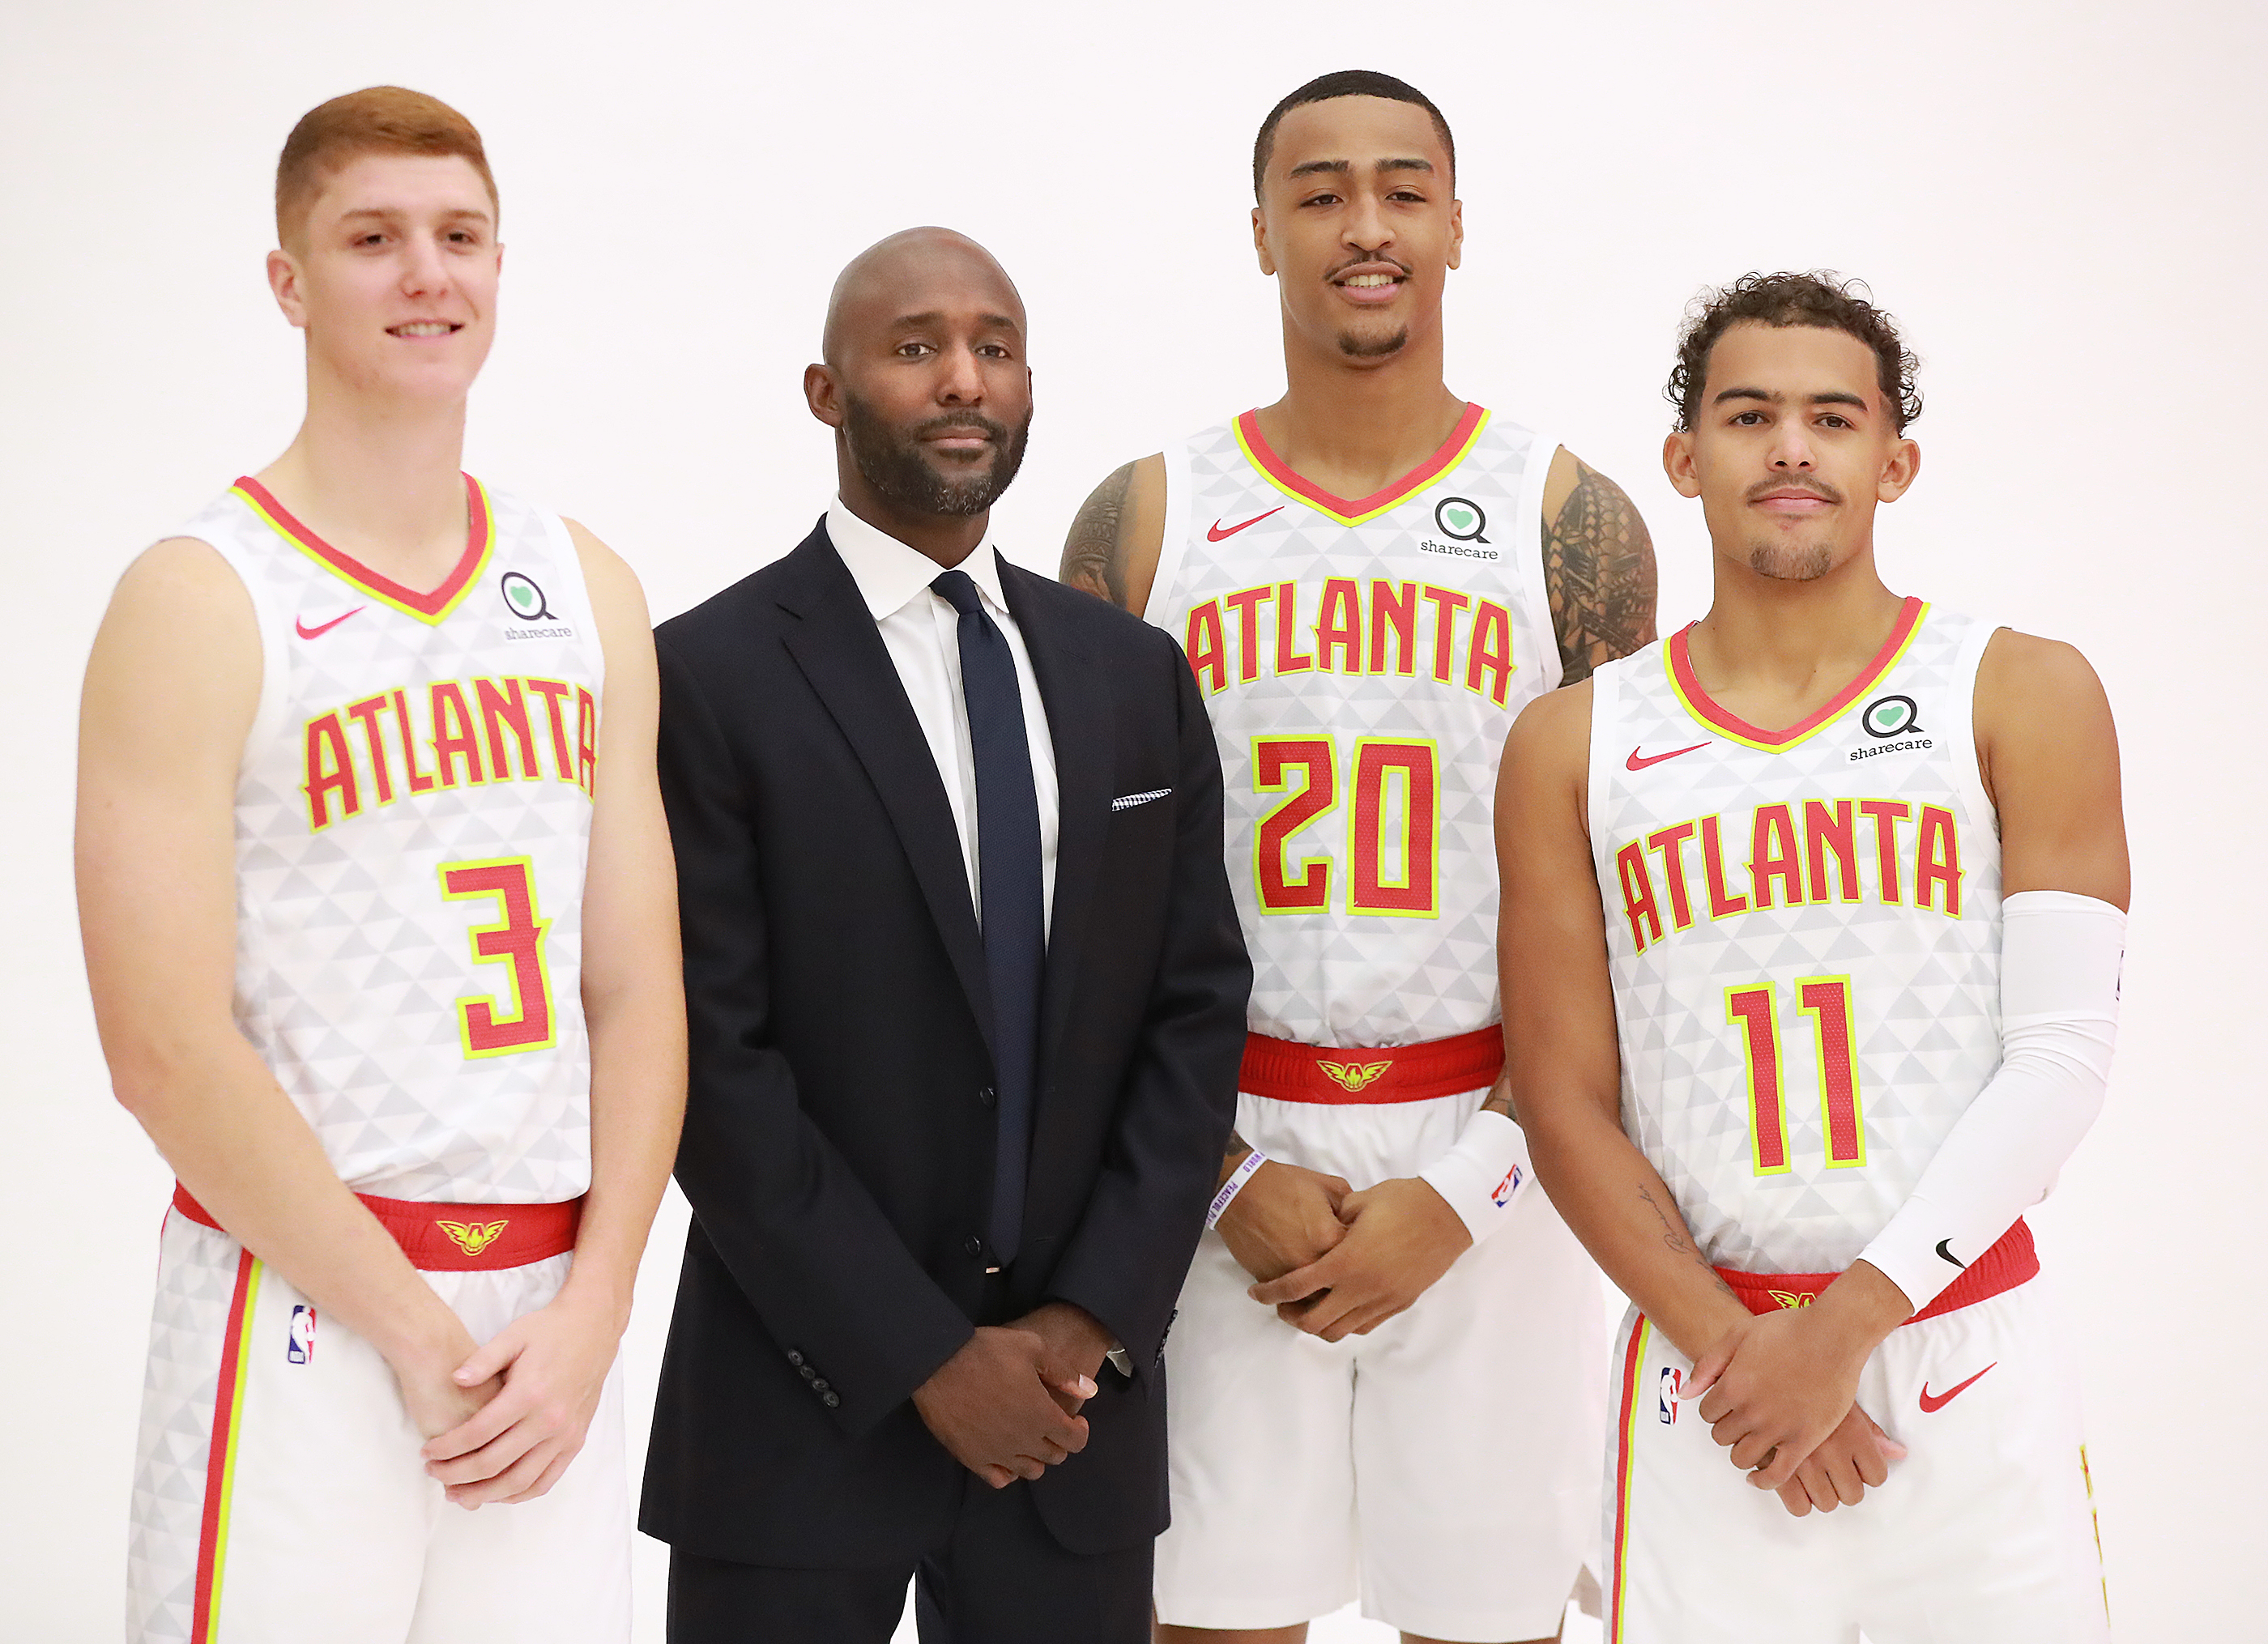 Hawks launch Peachtree City uniforms and celebrate Pride this